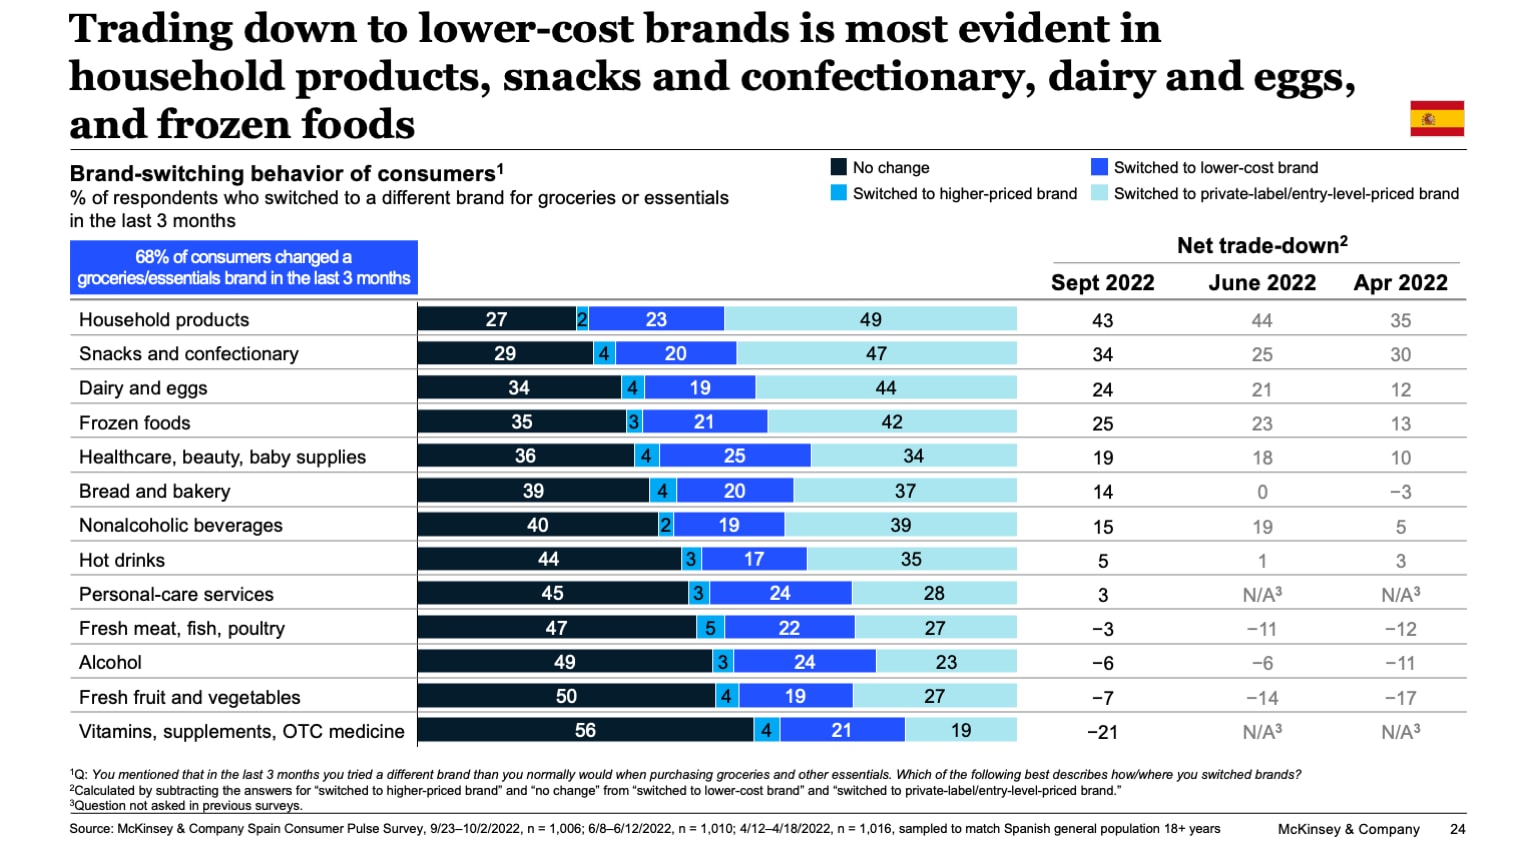 Trading down to lower-cost brands is most evident in household products, snacks and confectionary, dairy and eggs, and frozen foods